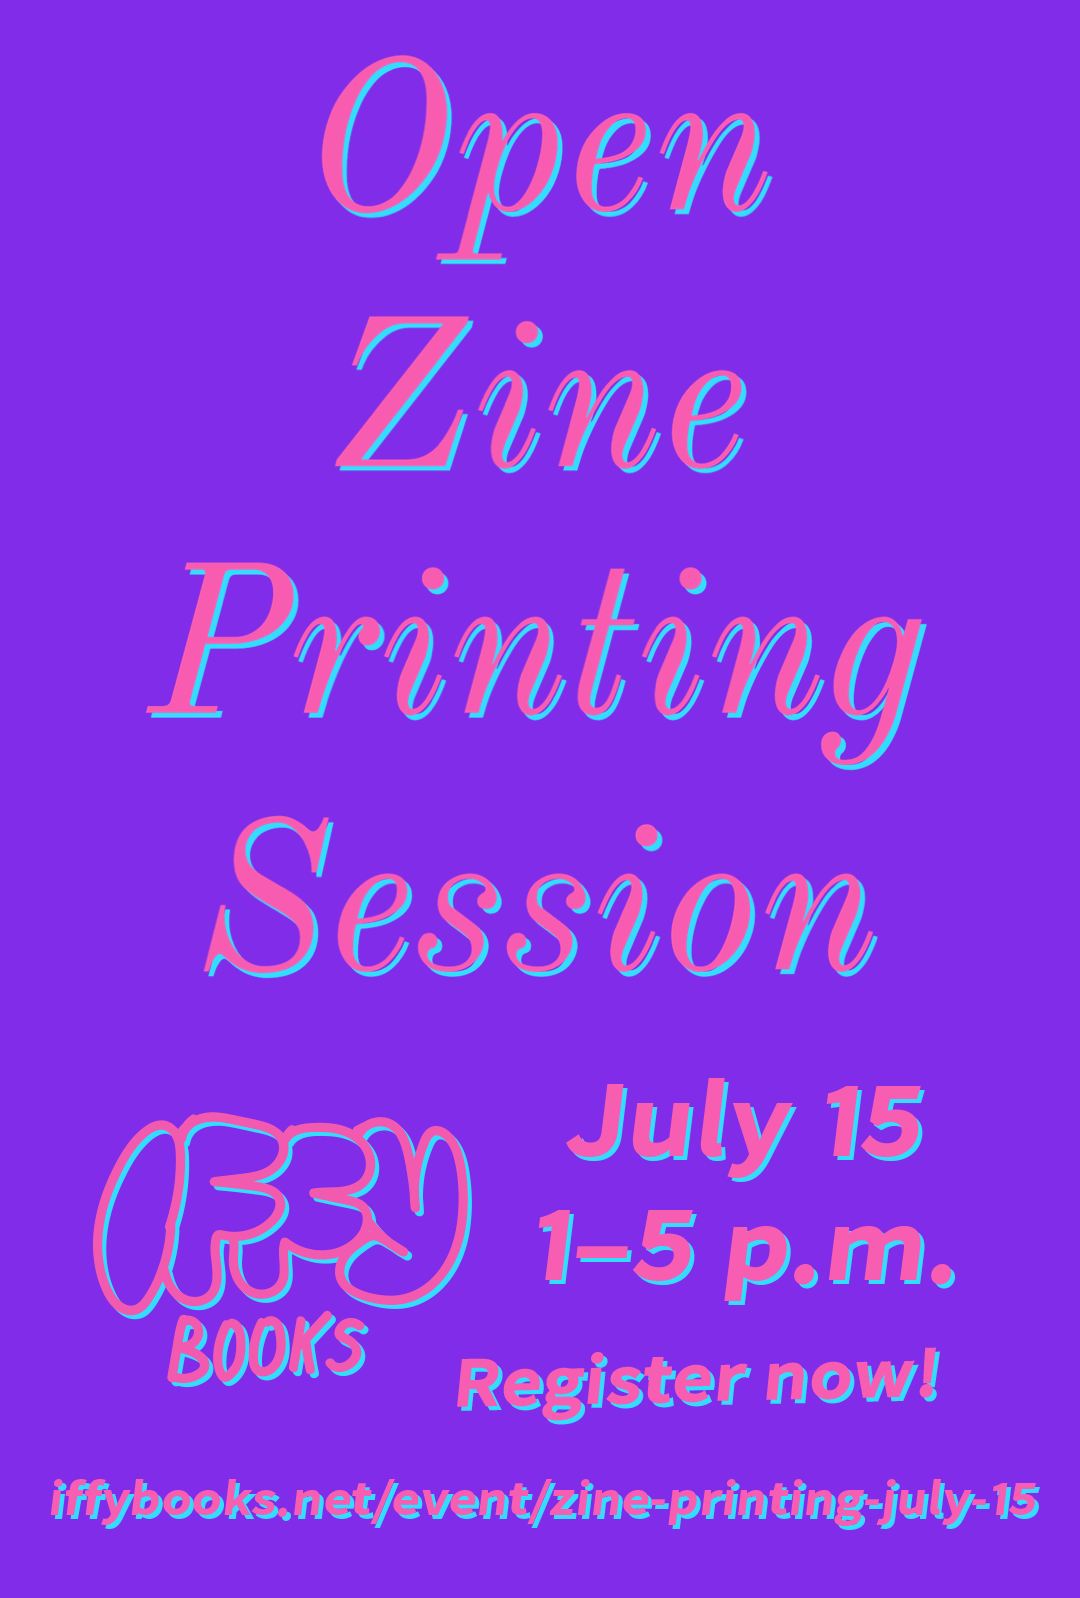 Pink text with a teal drop shadow on a purple background: Zine Printing Session / Iffy Books / July 15 / 1–5 p.m. / Register now! / iffybooks.net/event/zine-printing-july-15